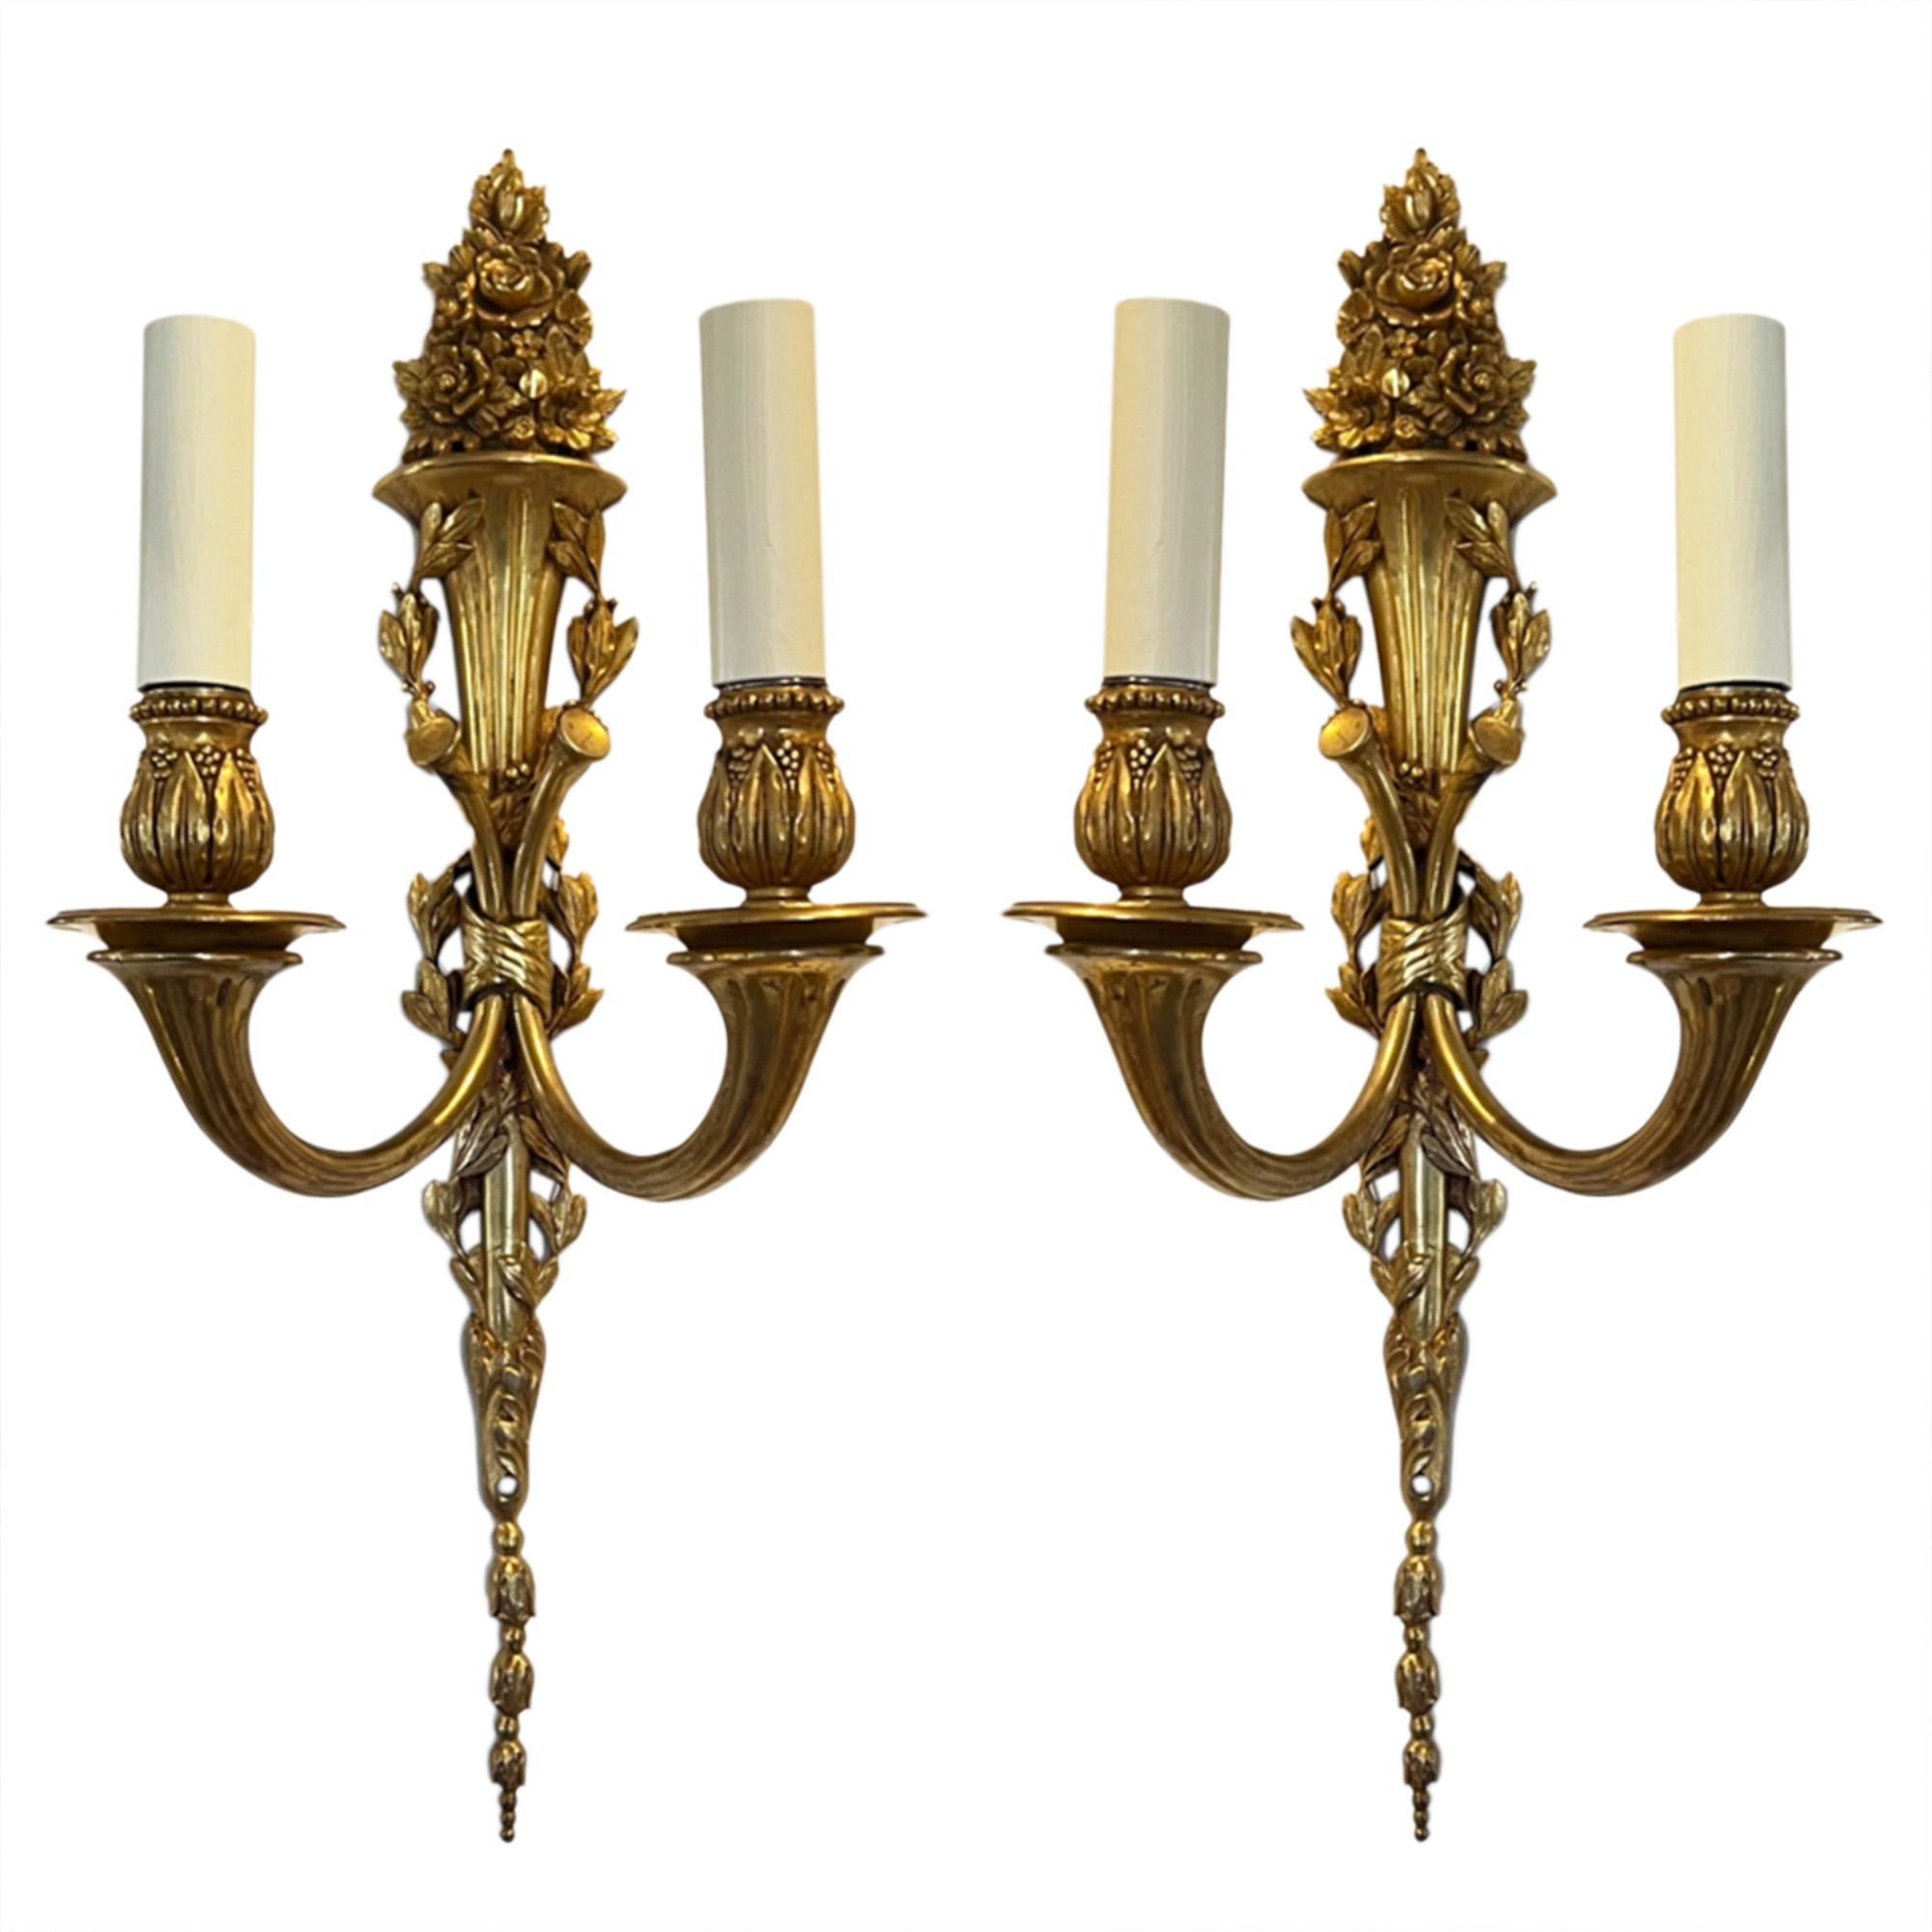 We have two pairs of these stunning gilt brass wall sconces.

Exceptional quality and with a decorative design. Please take a close look at all our photographs. 

Made in France in the 1950s. 

One pair is slightly larger than the other, however,